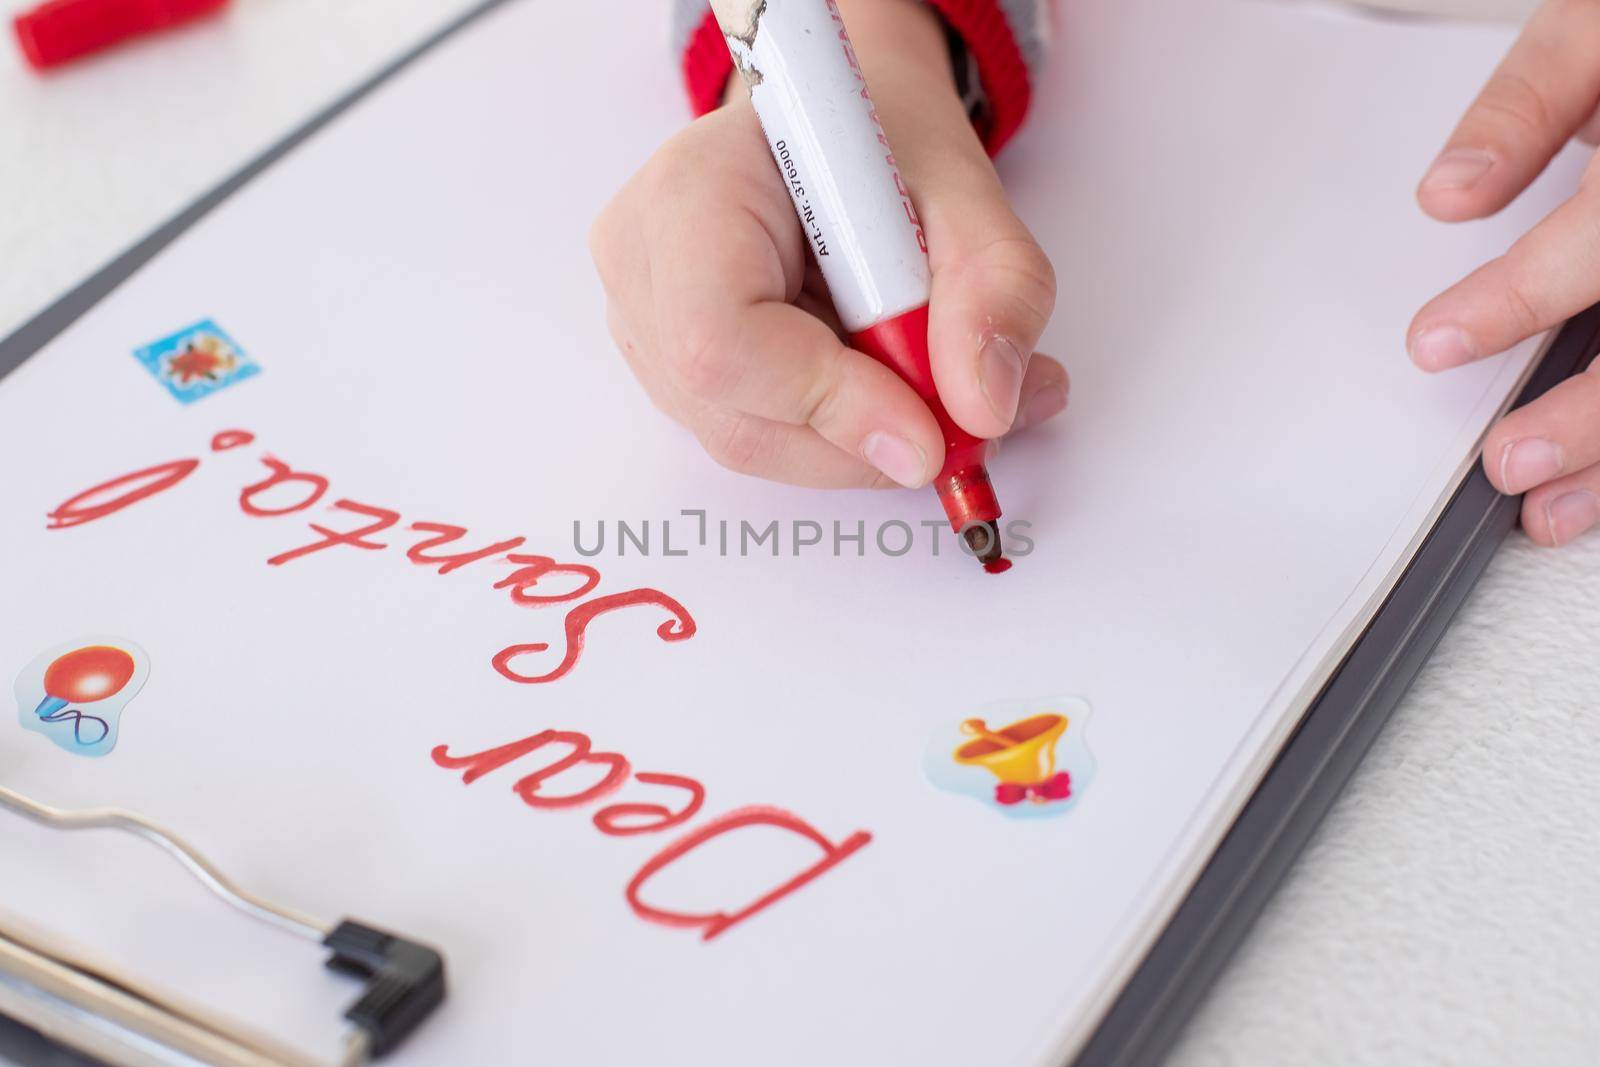 Dear Santa letter,Christmas card.girl wearing red sweater, holding a felt pen and writing on white sheet on white background.Childhood dreams about gifts.christmas and New year concept.winter holidays by YuliaYaspe1979